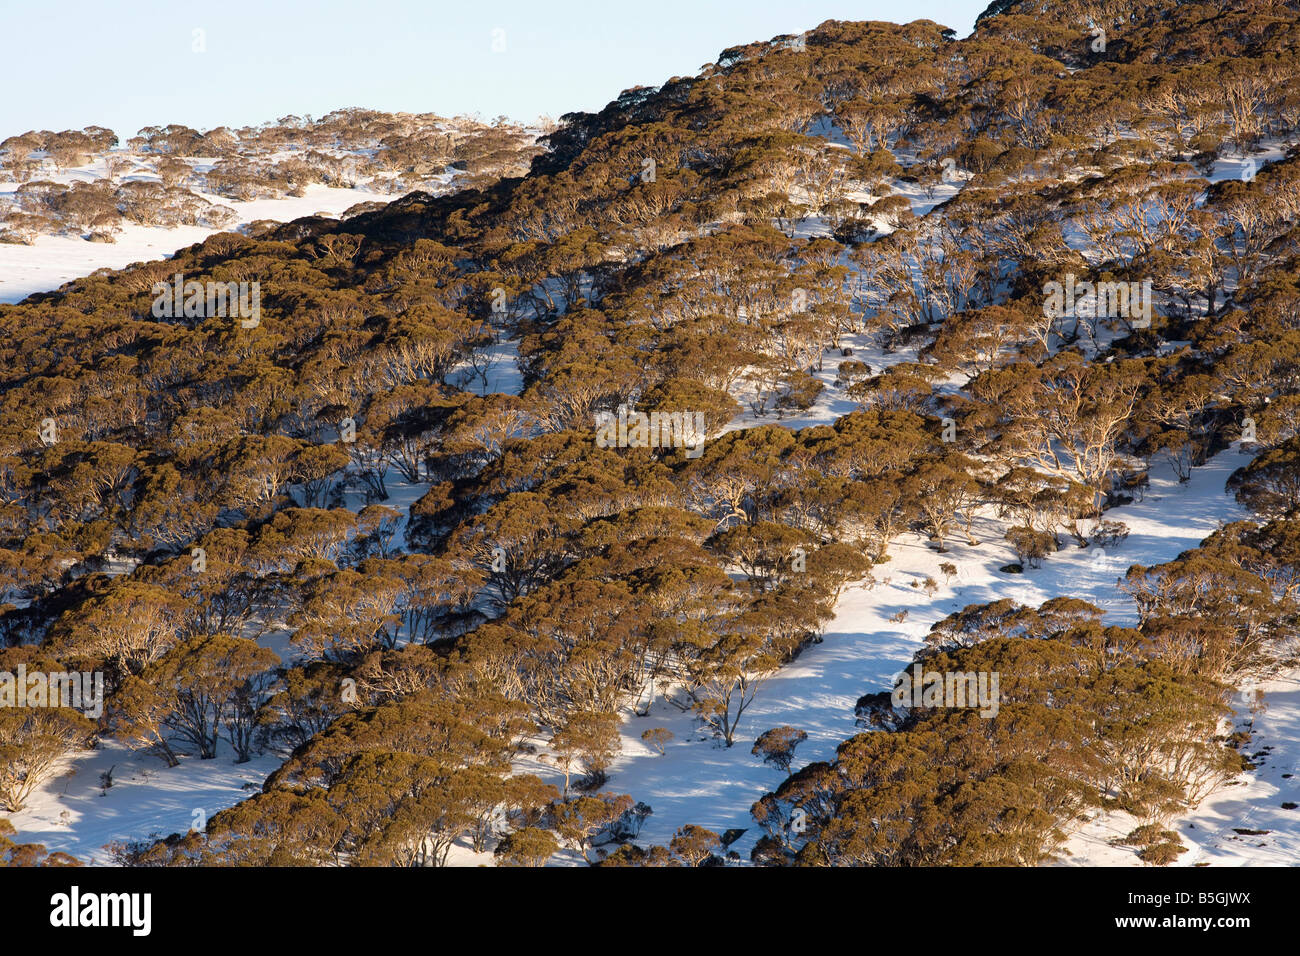 Snow Gums Charlotte Pass Snowy Mountains, New South Wales Australien Stockfoto